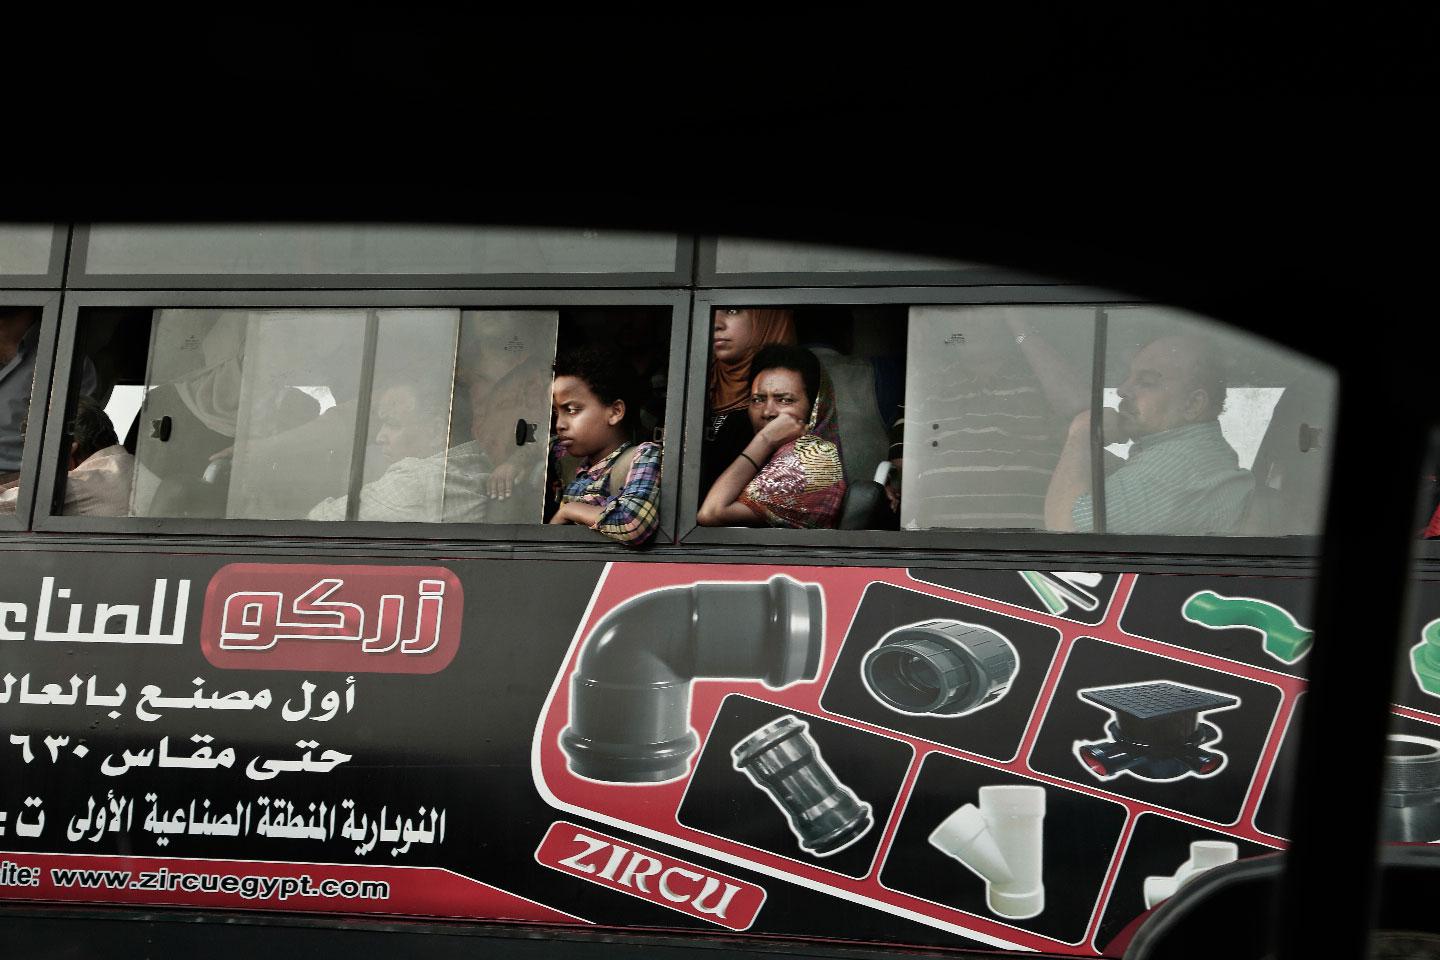 Commuters ride a public bus as they wait in traffic, in Cairo